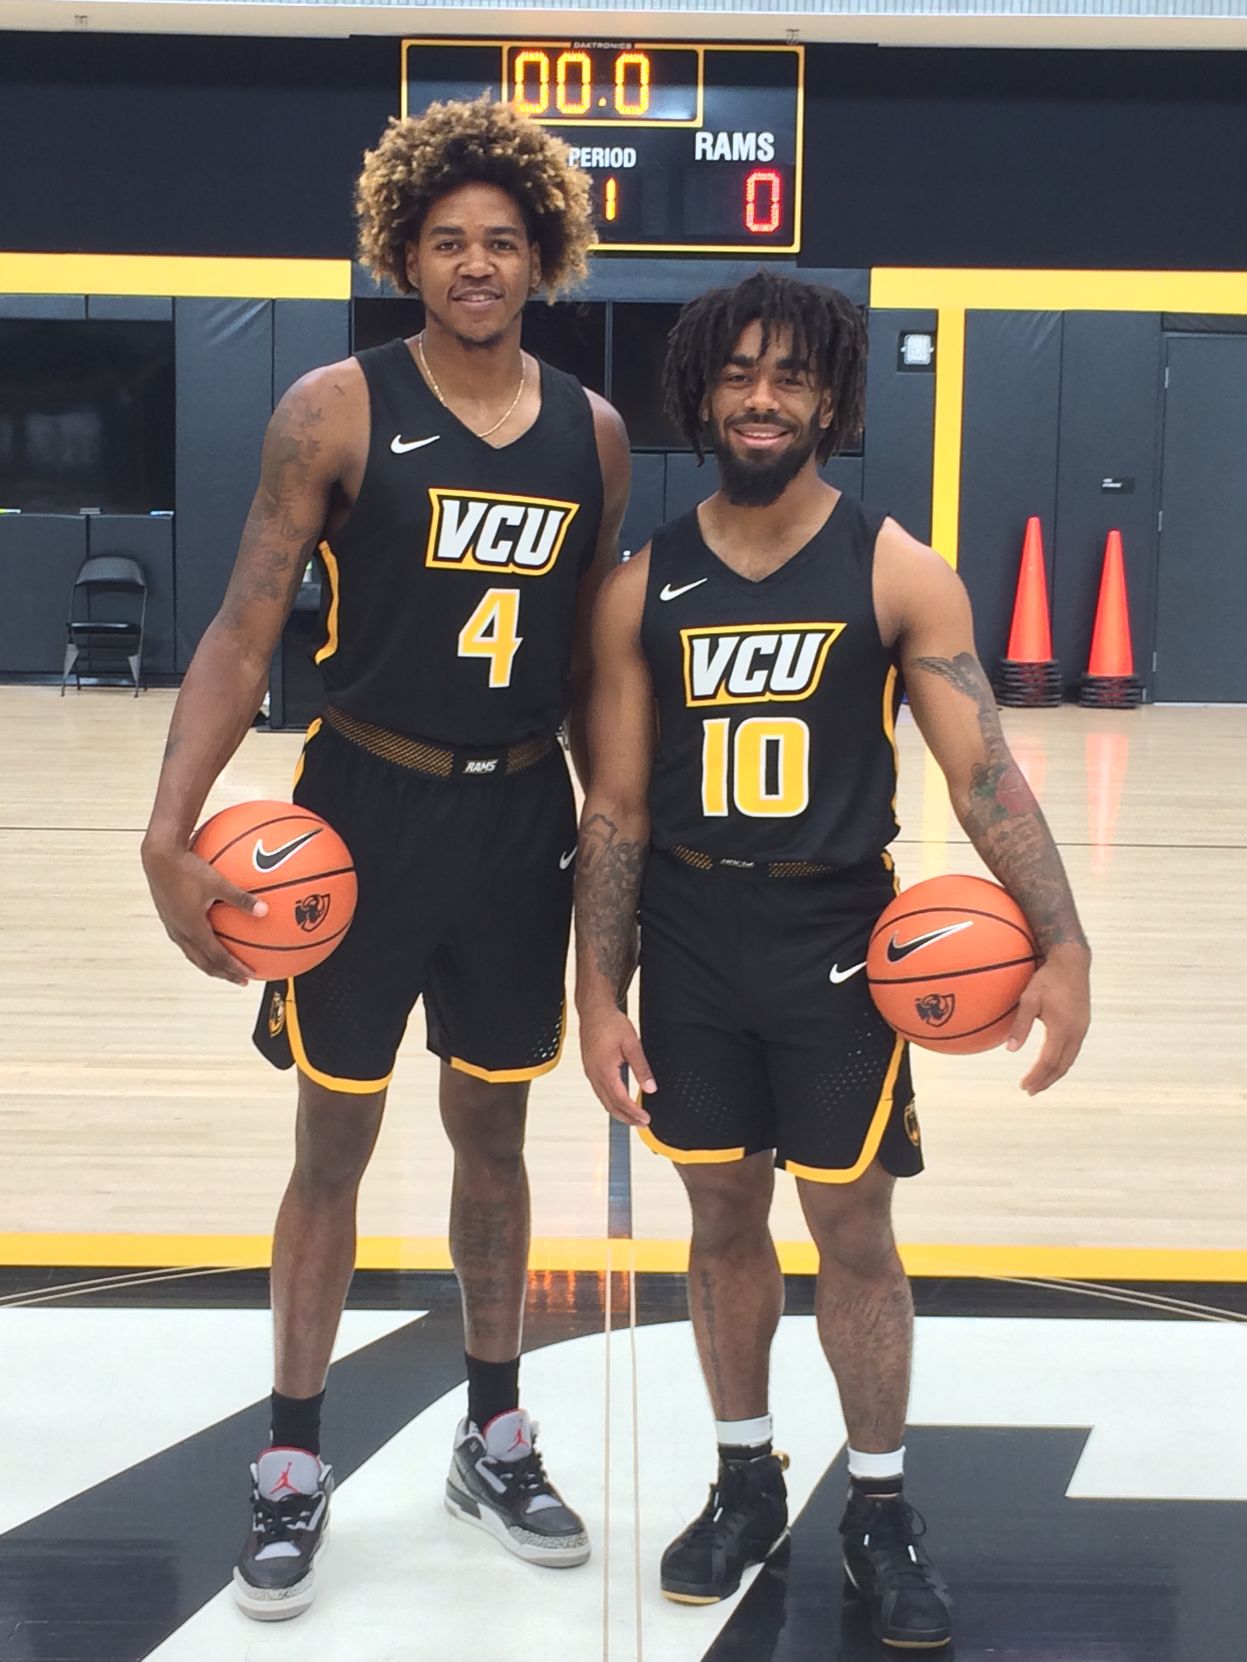 VCU Rams basketball throwback jersey numbers